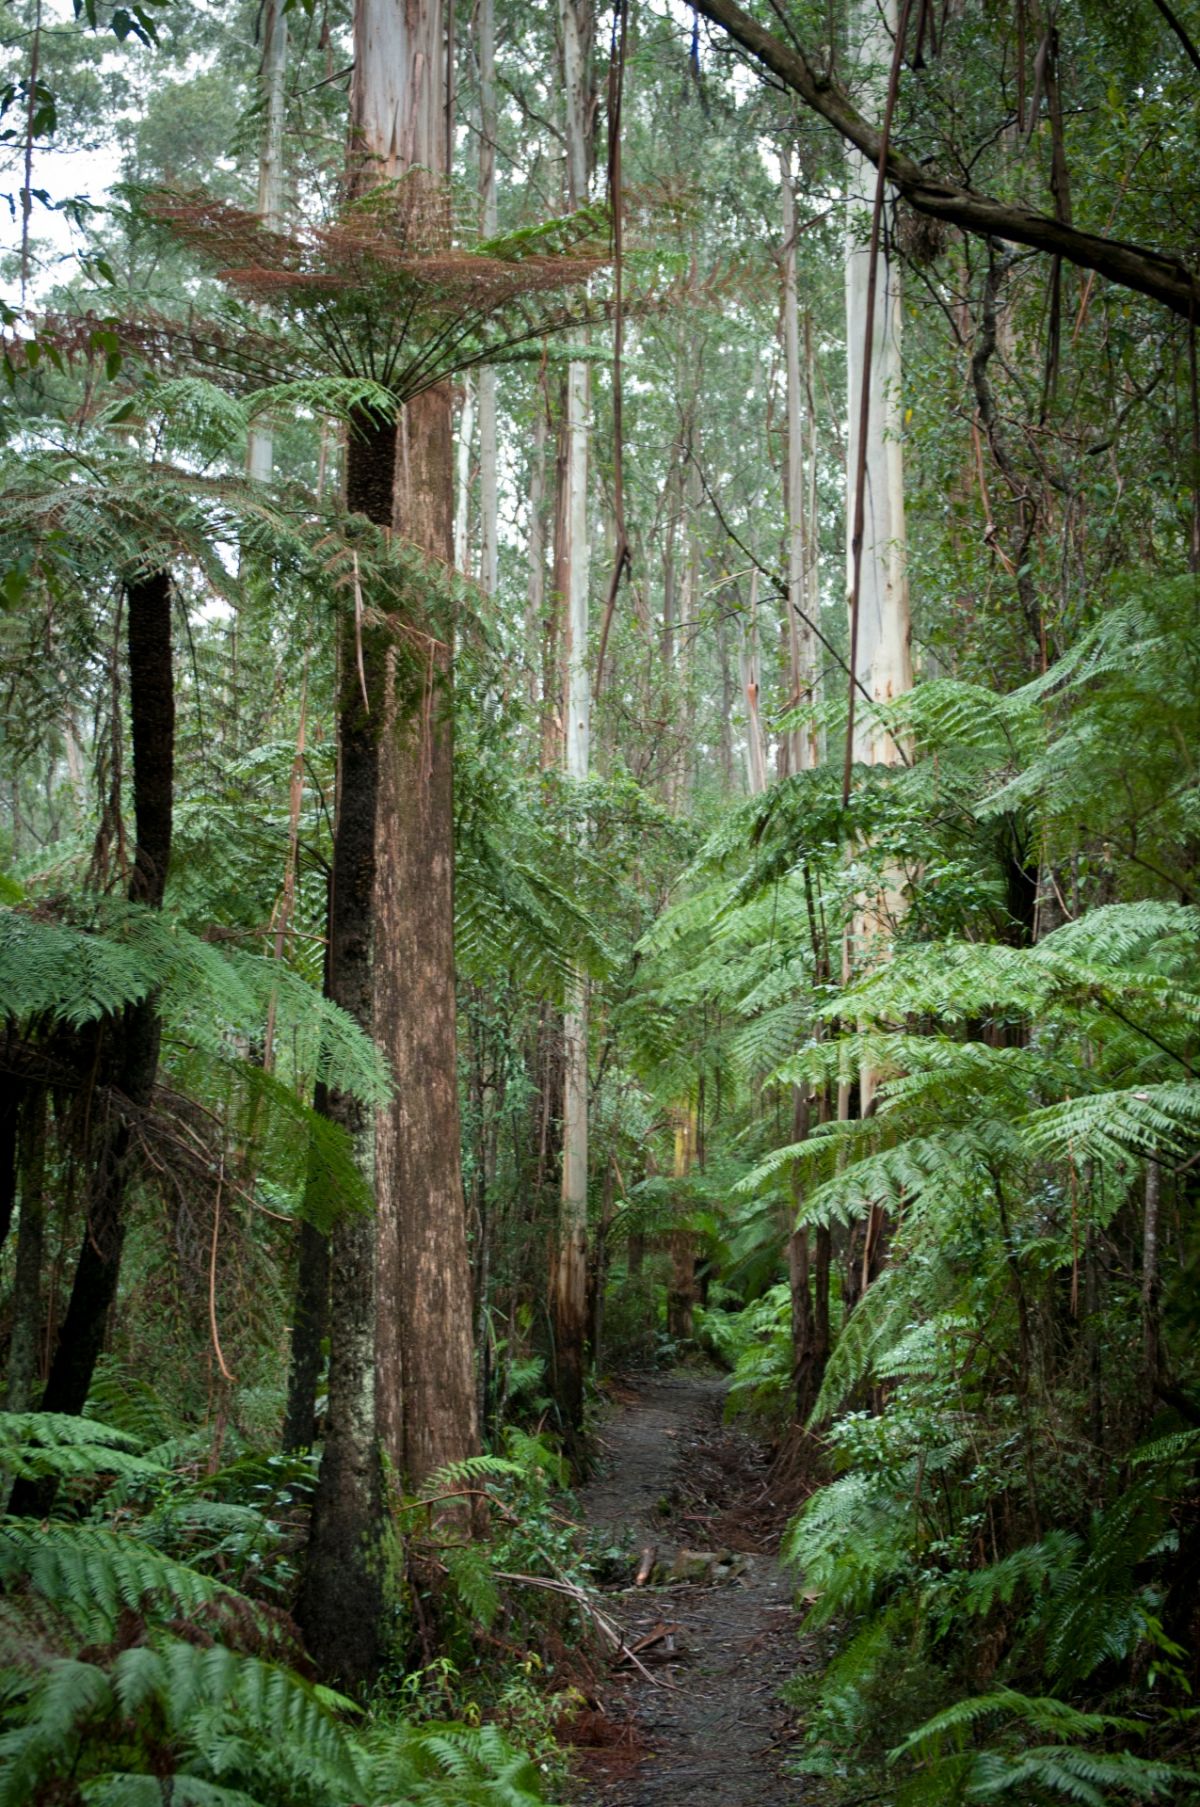 A narrow forest walk through tall trees and ferns